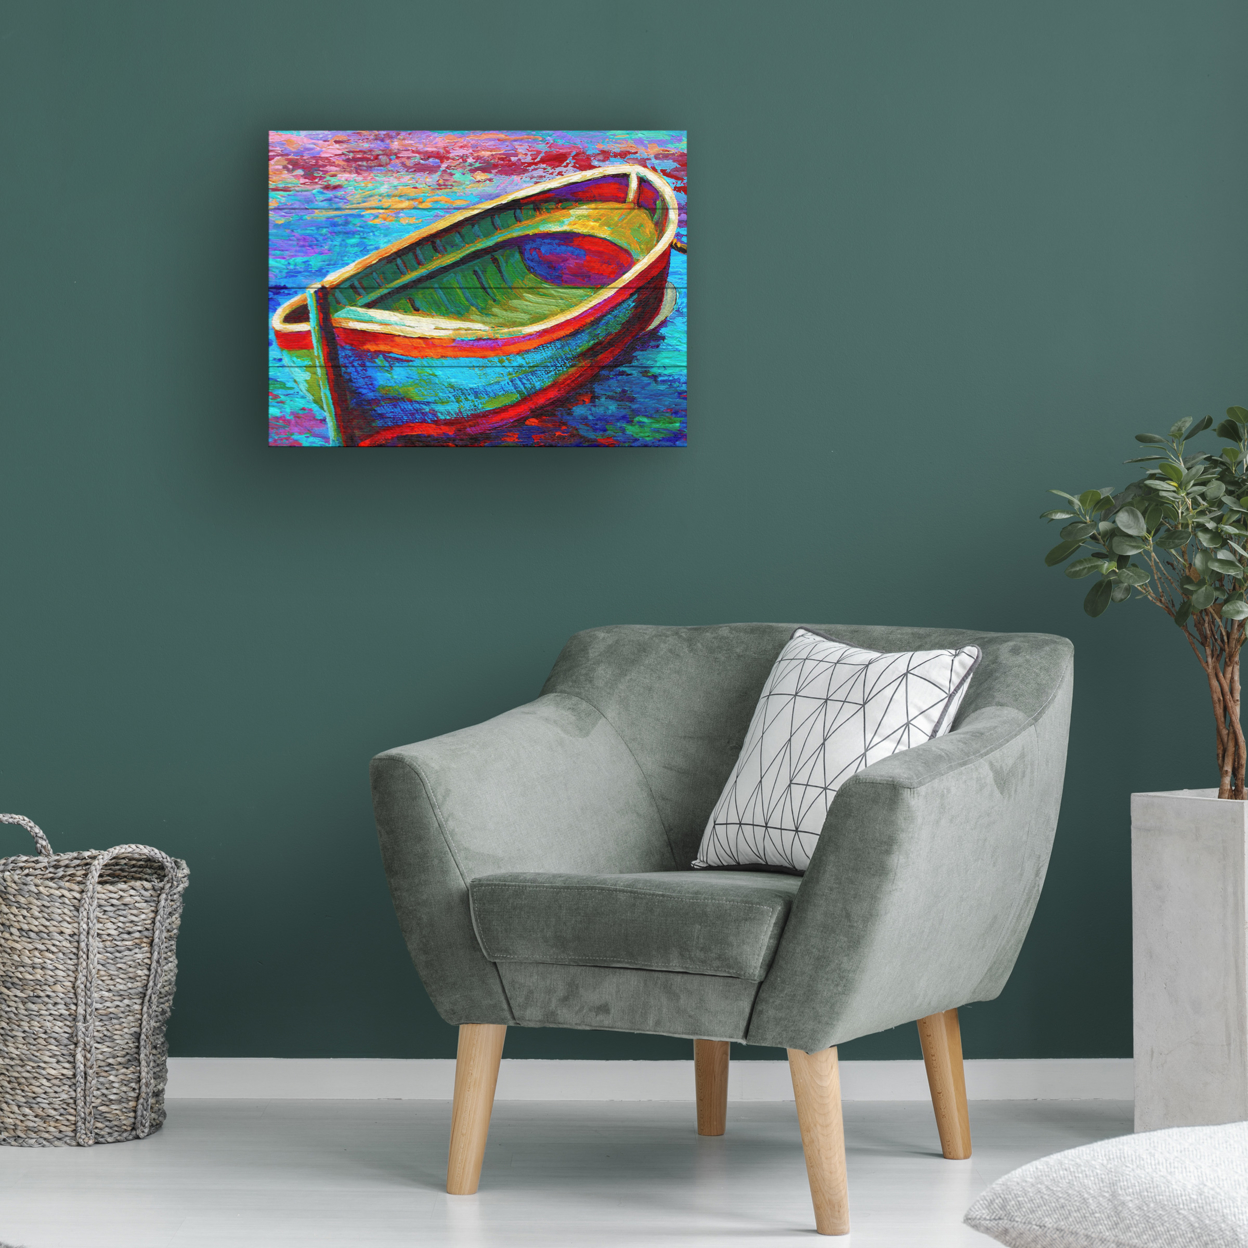 Wall Art 12 X 16 Inches Titled Boat 9 Ready To Hang Printed On Wooden Planks